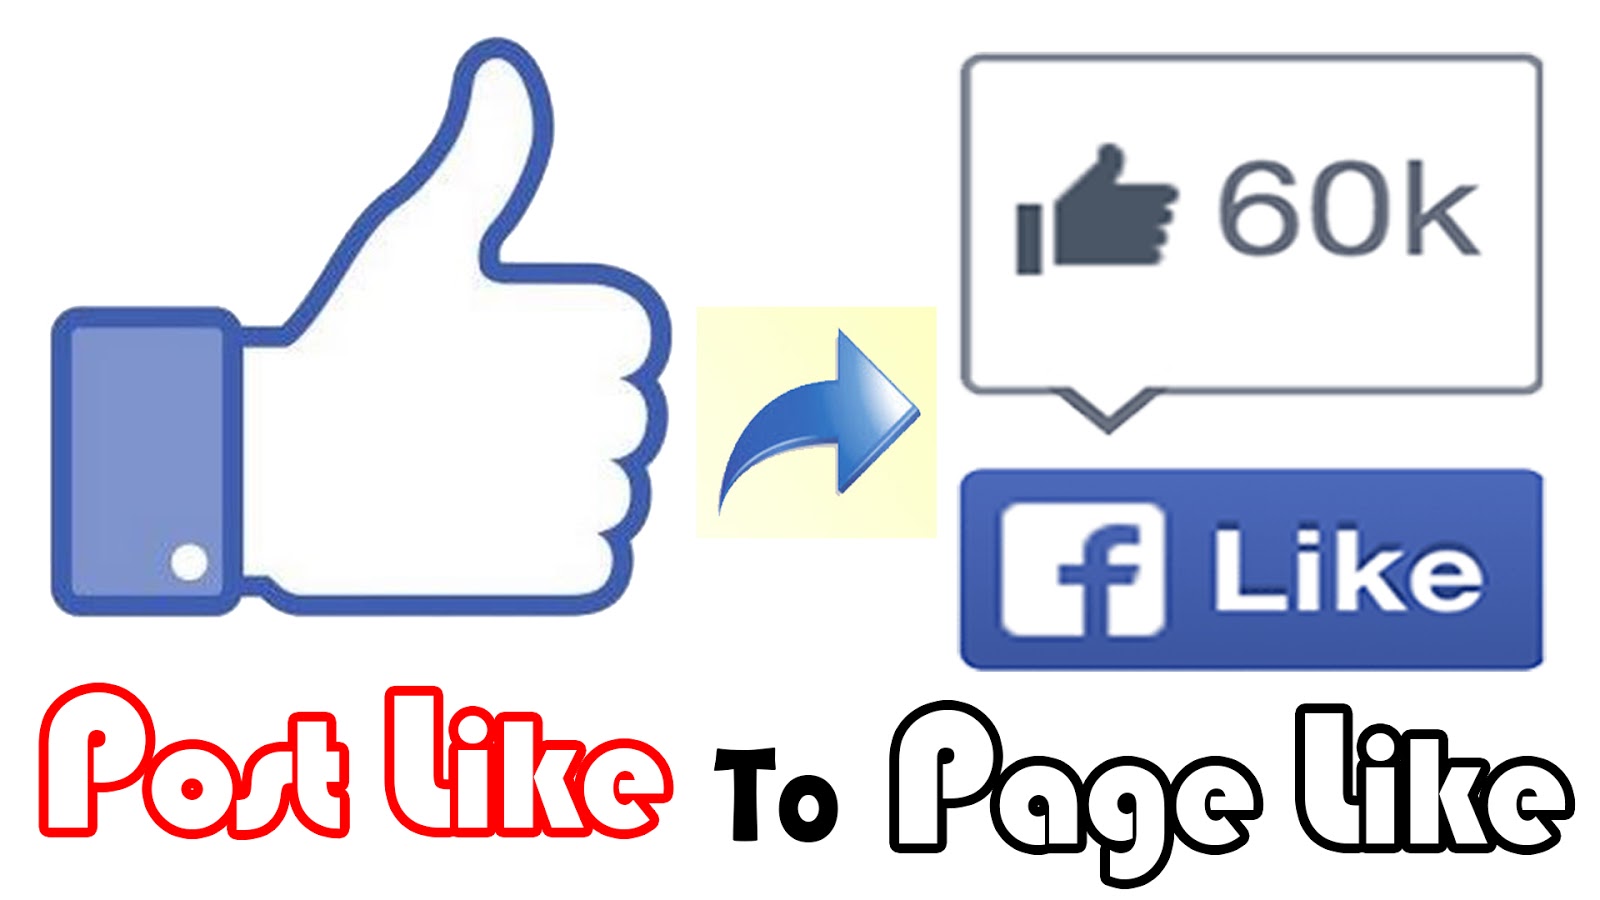 Like your page. Facebook Post likes. Like Page. Page like размер. Лайк страница.